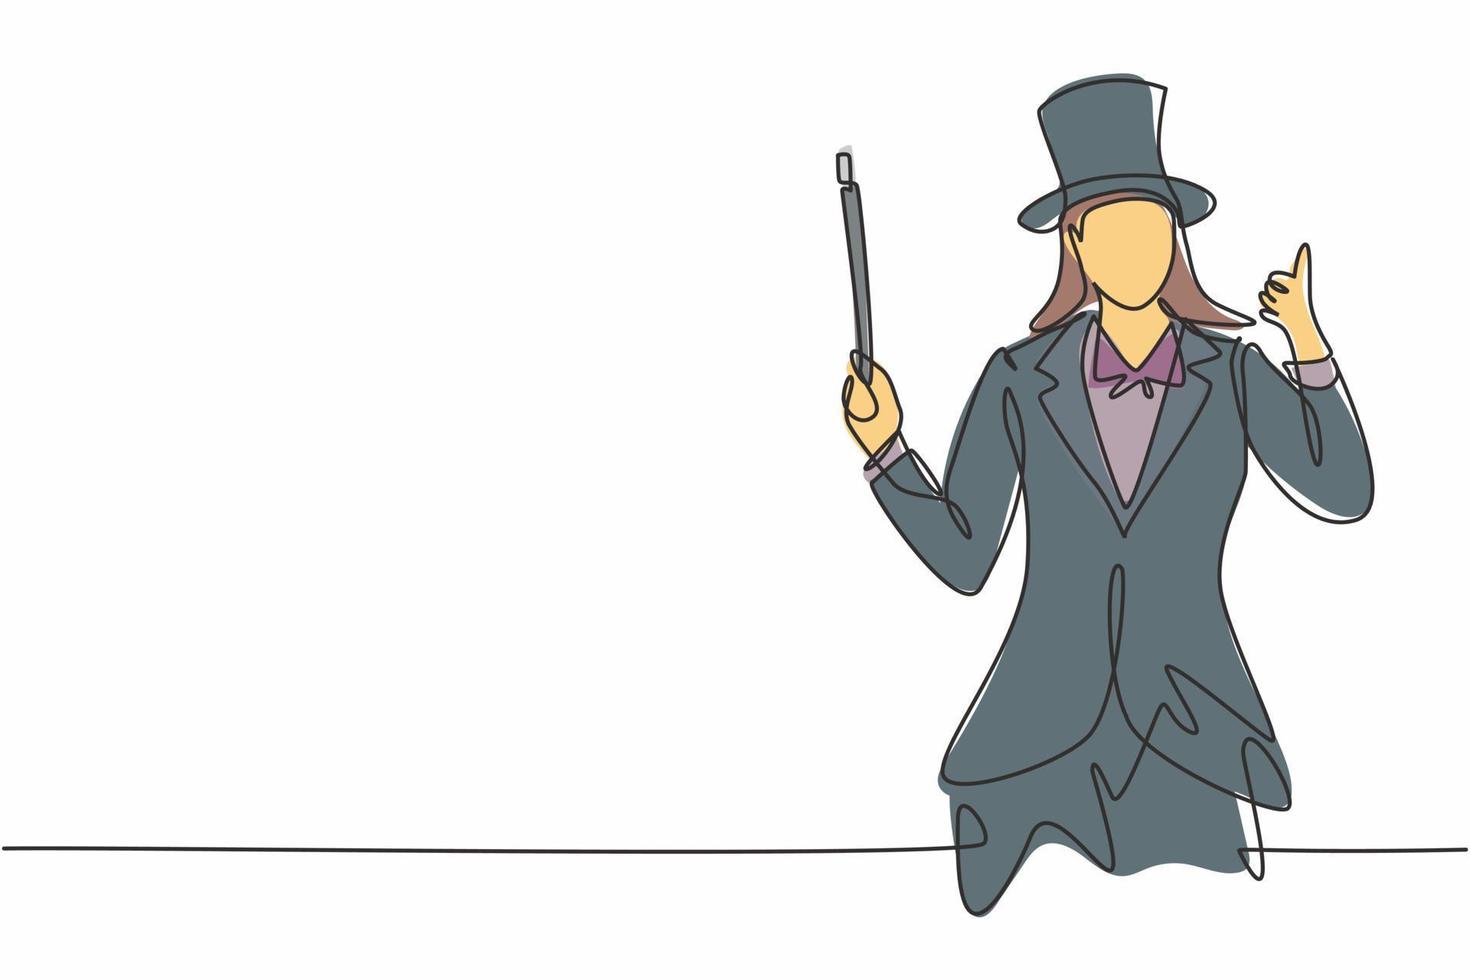 Single one line drawing of female magician with a gesture thumbs up wearing a hat and holding a magic stick ready to entertain the audience. Continuous line draw design graphic vector illustration